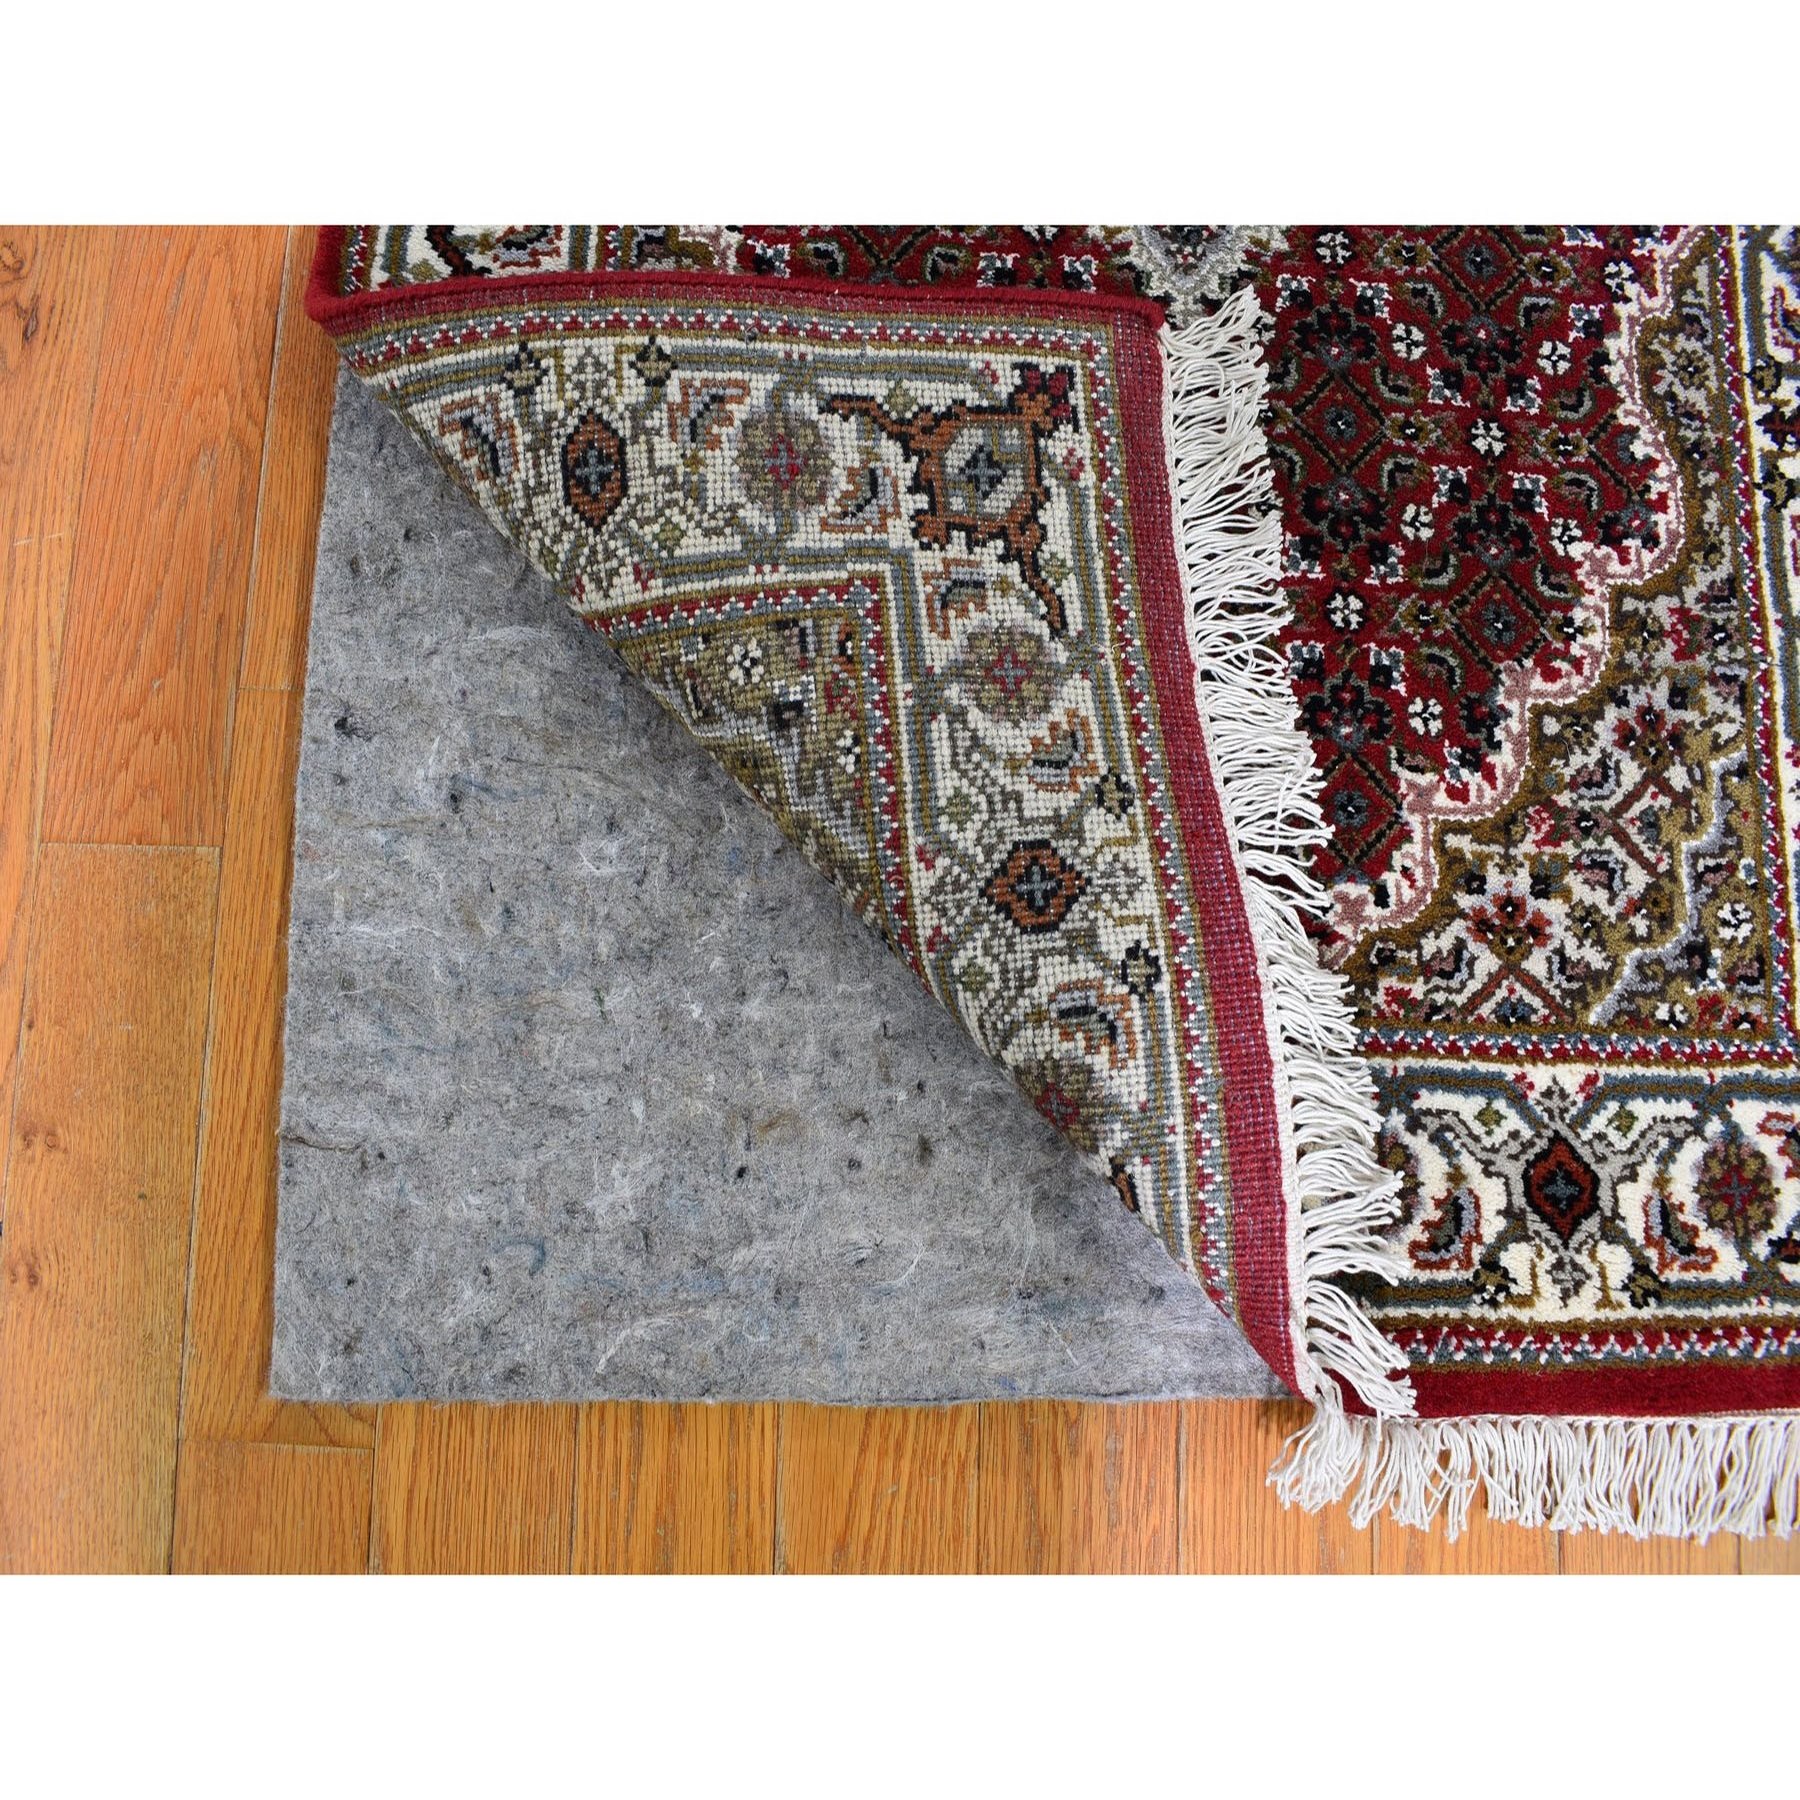 2-7 x20-5  Red Tabriz Mahi Wool and Silk XL Runner Hand Knotted Oriental Rug 